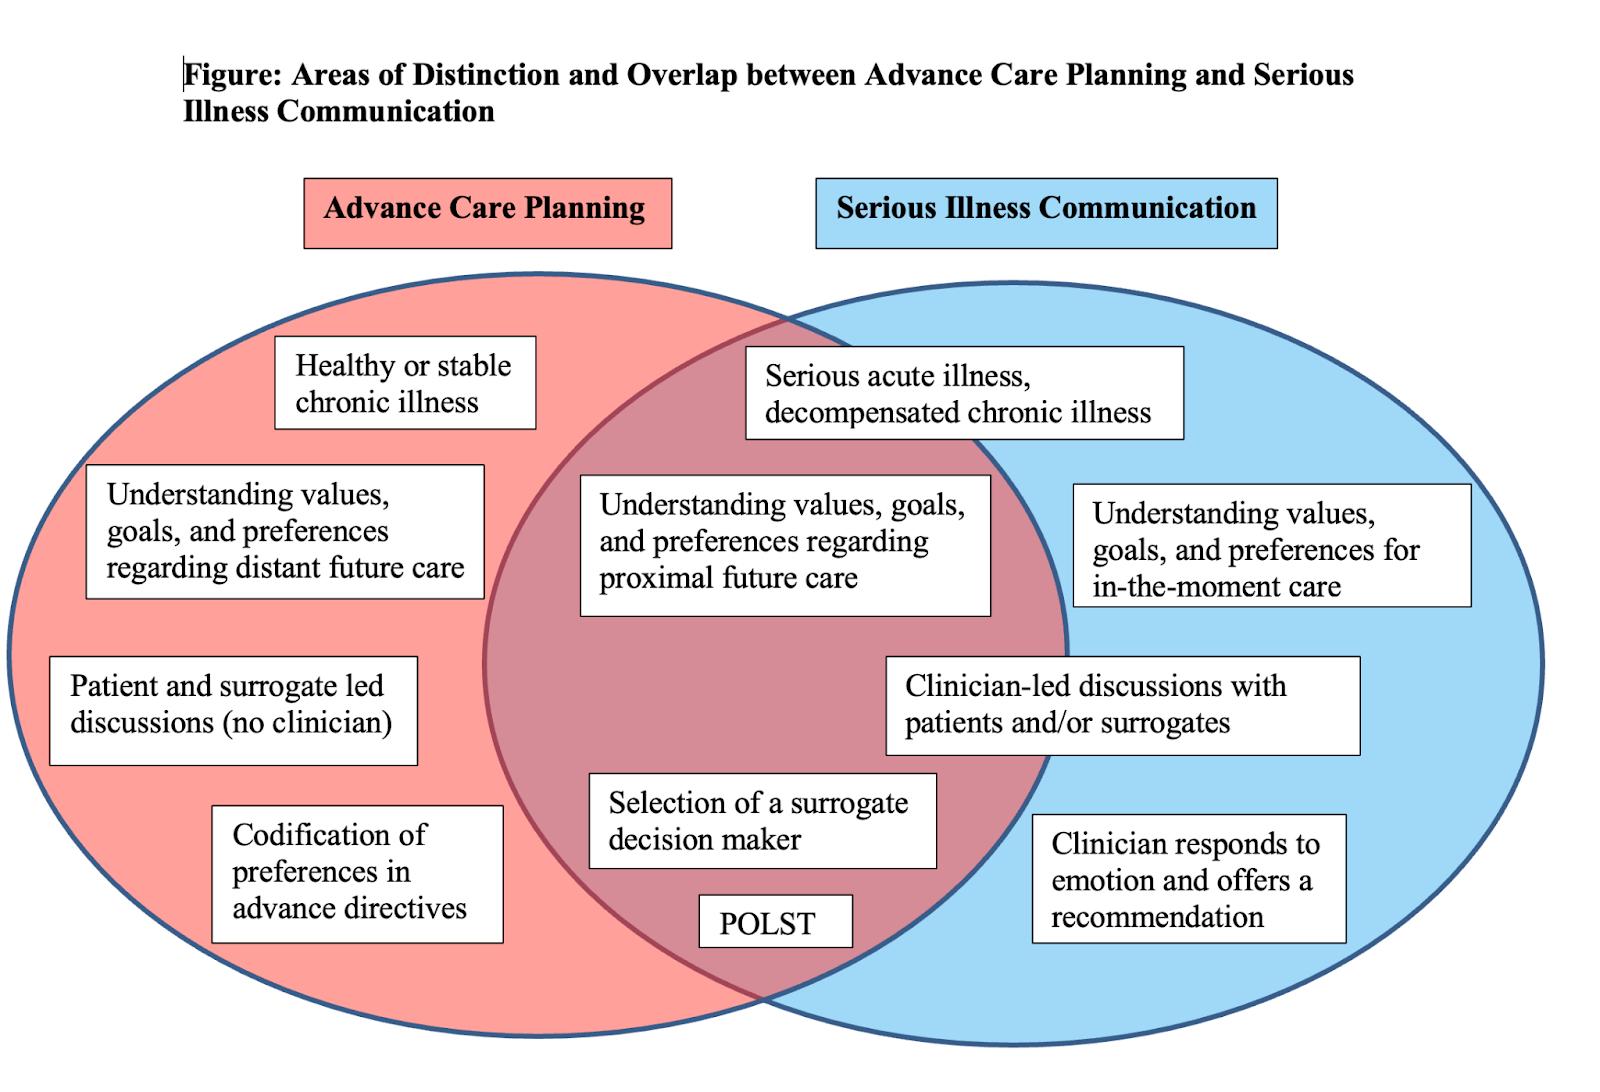 Advanced Care Planning and Serious Illness communication